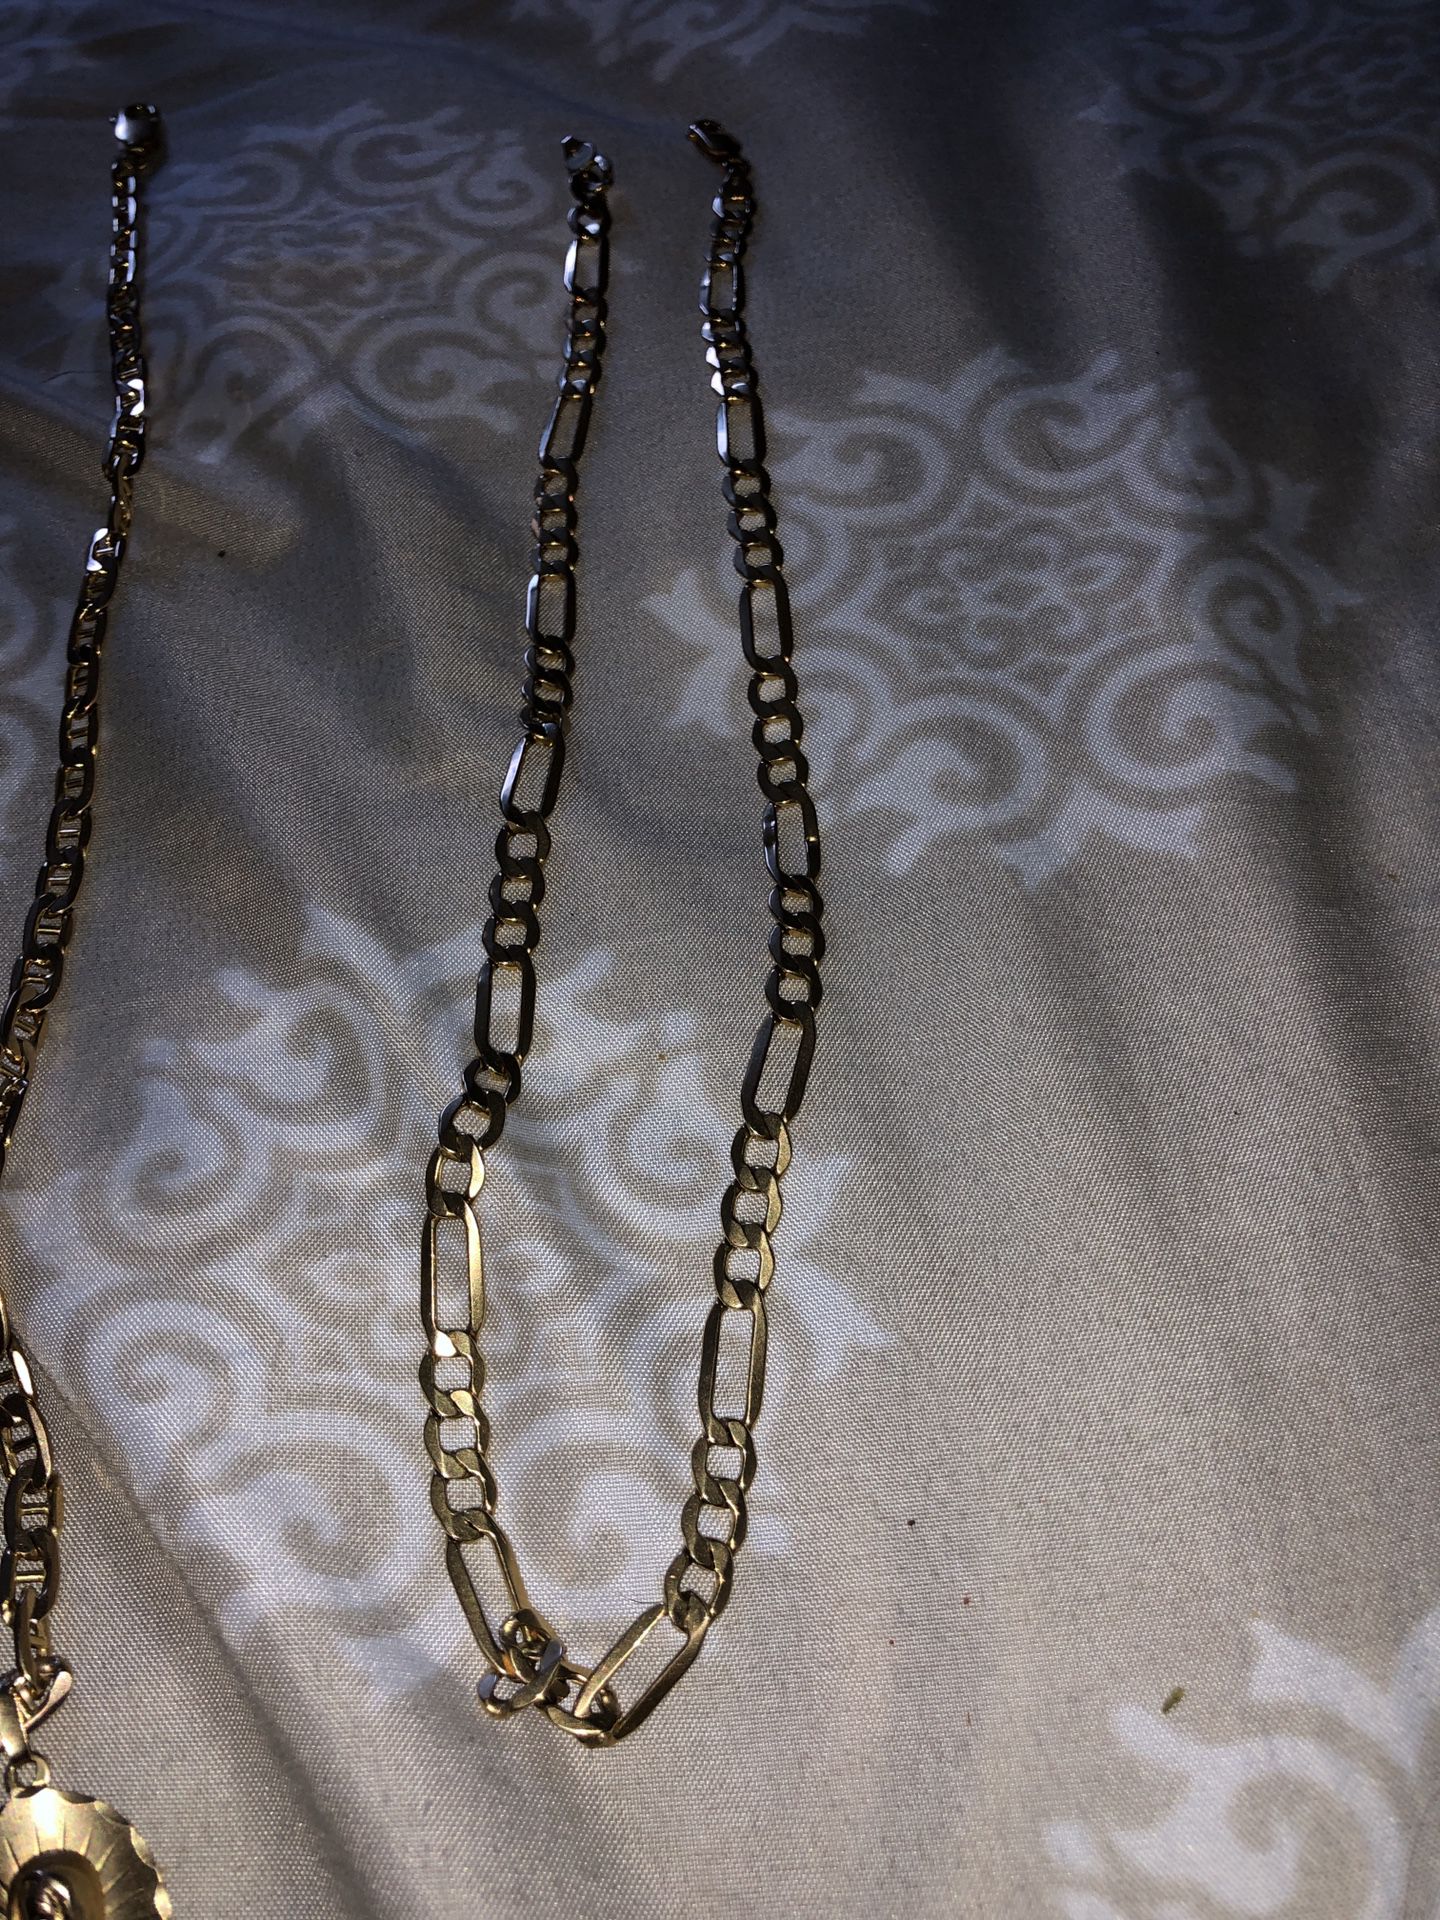 Gold chains for sale serious offers only